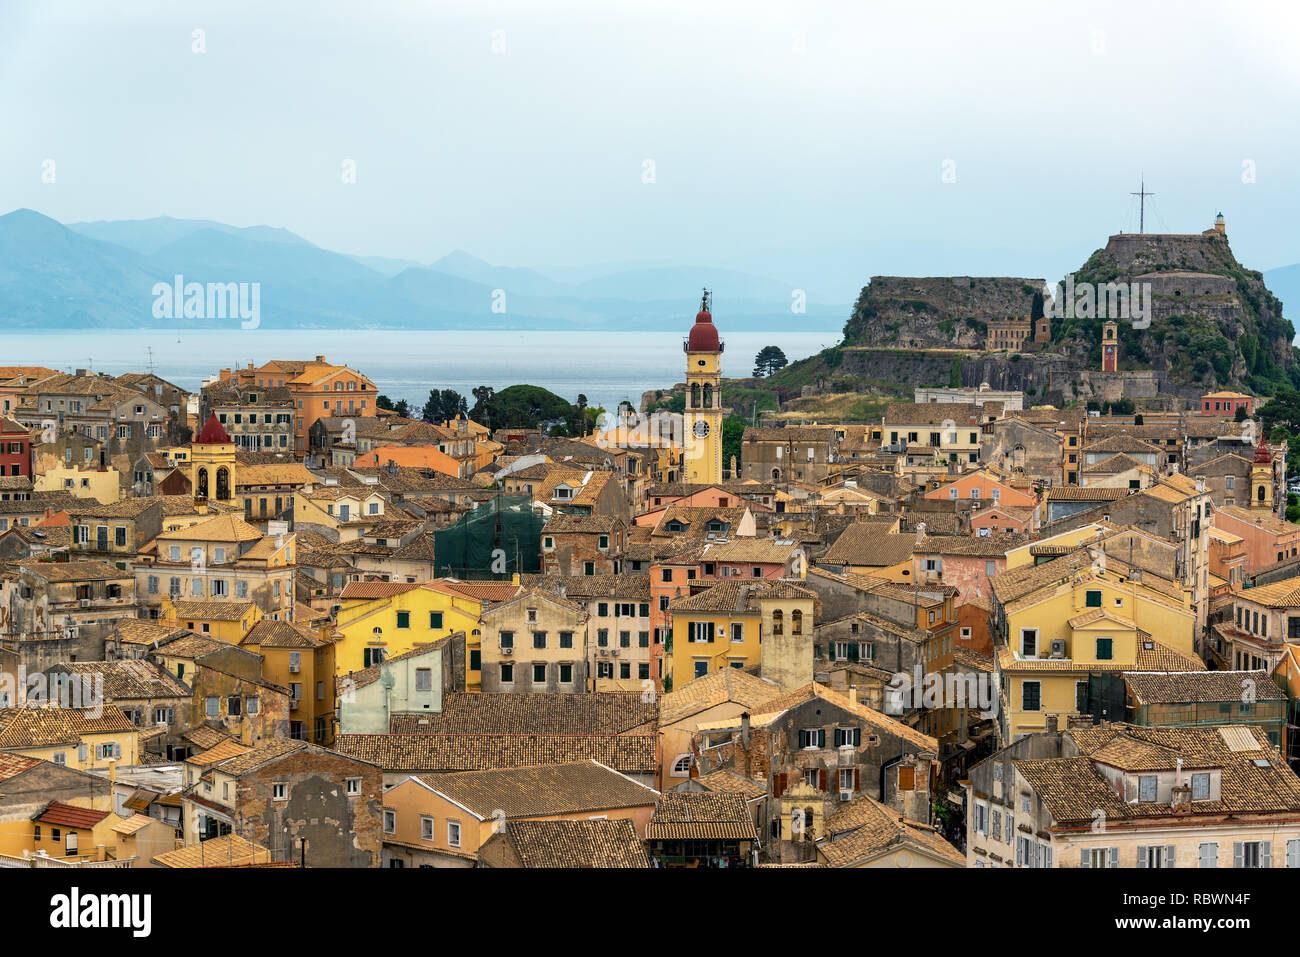 Cityscape of Corfu, Greece with the Old Fortress in the background Stock Photo